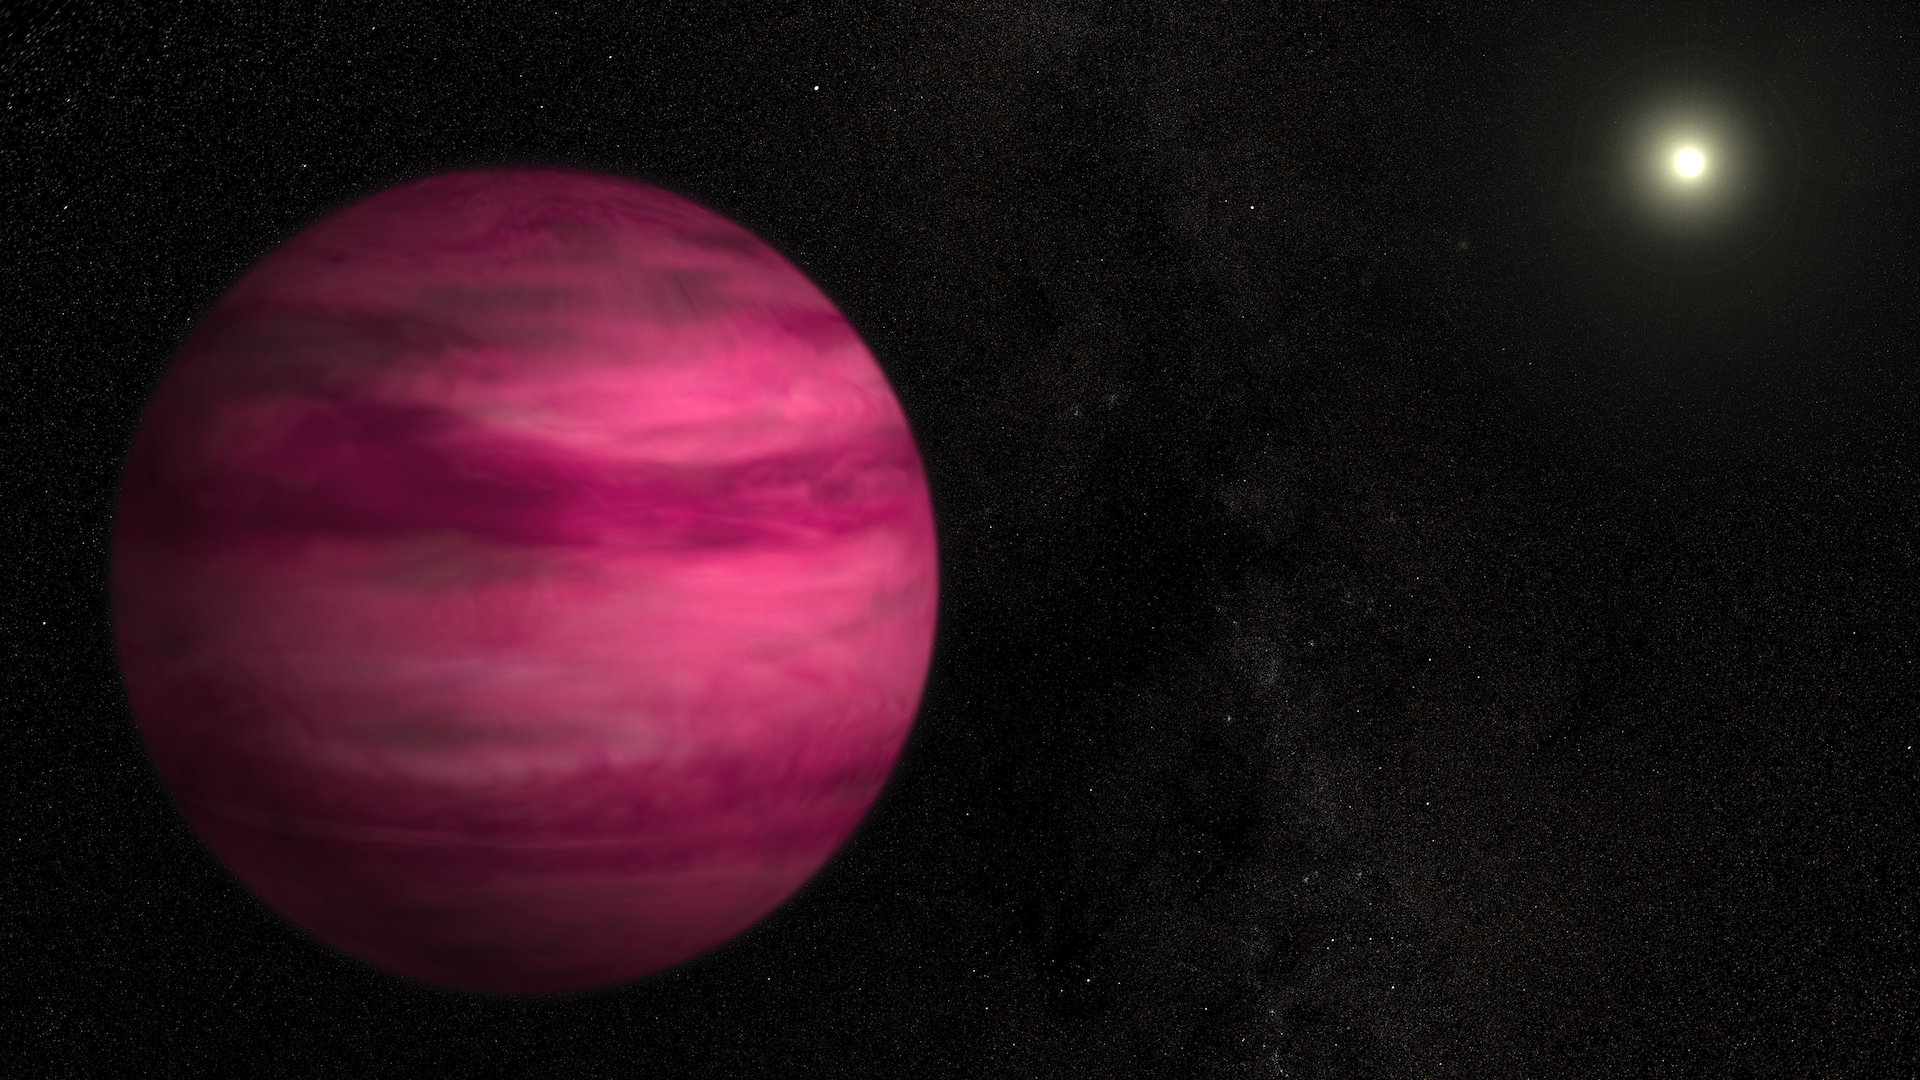 Glowing a dark magenta, the newly discovered exoplanet GJ 504b weighs in with about four times Jupiter's mass, making it the lowest-mass planet ever directly imaged around a star like the sun. Artist's rendering.Credit: NASA's Goddard Space Flight Center/S. Wiessinger